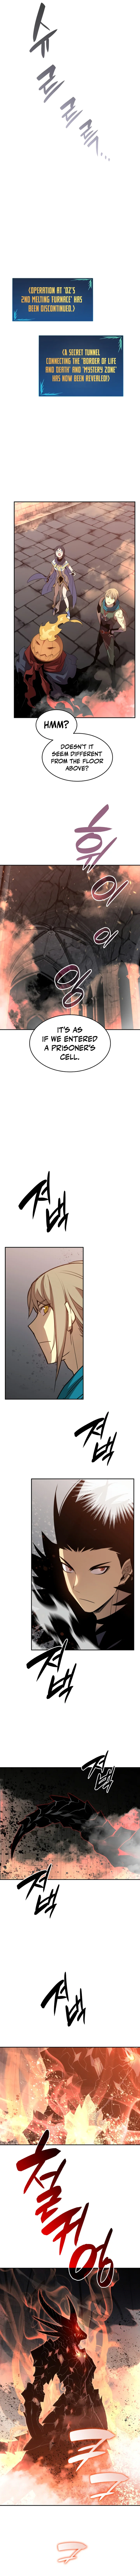 Worn and Torn Newbie - Chapter 148 Page 6